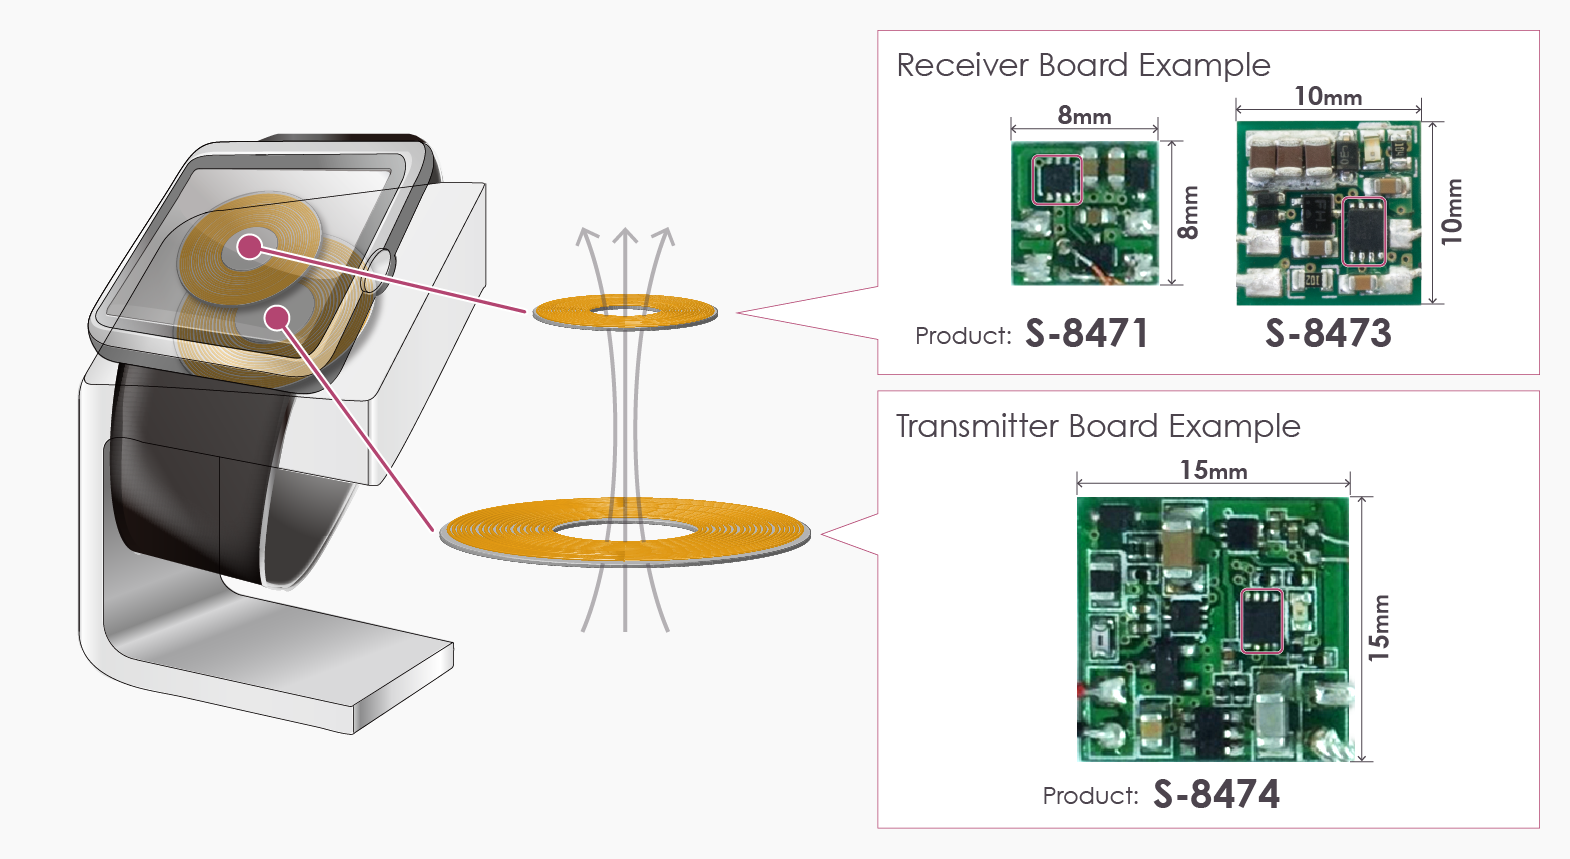 Compact 8mm × 8mm PCB Enables Wireless Power Transfer